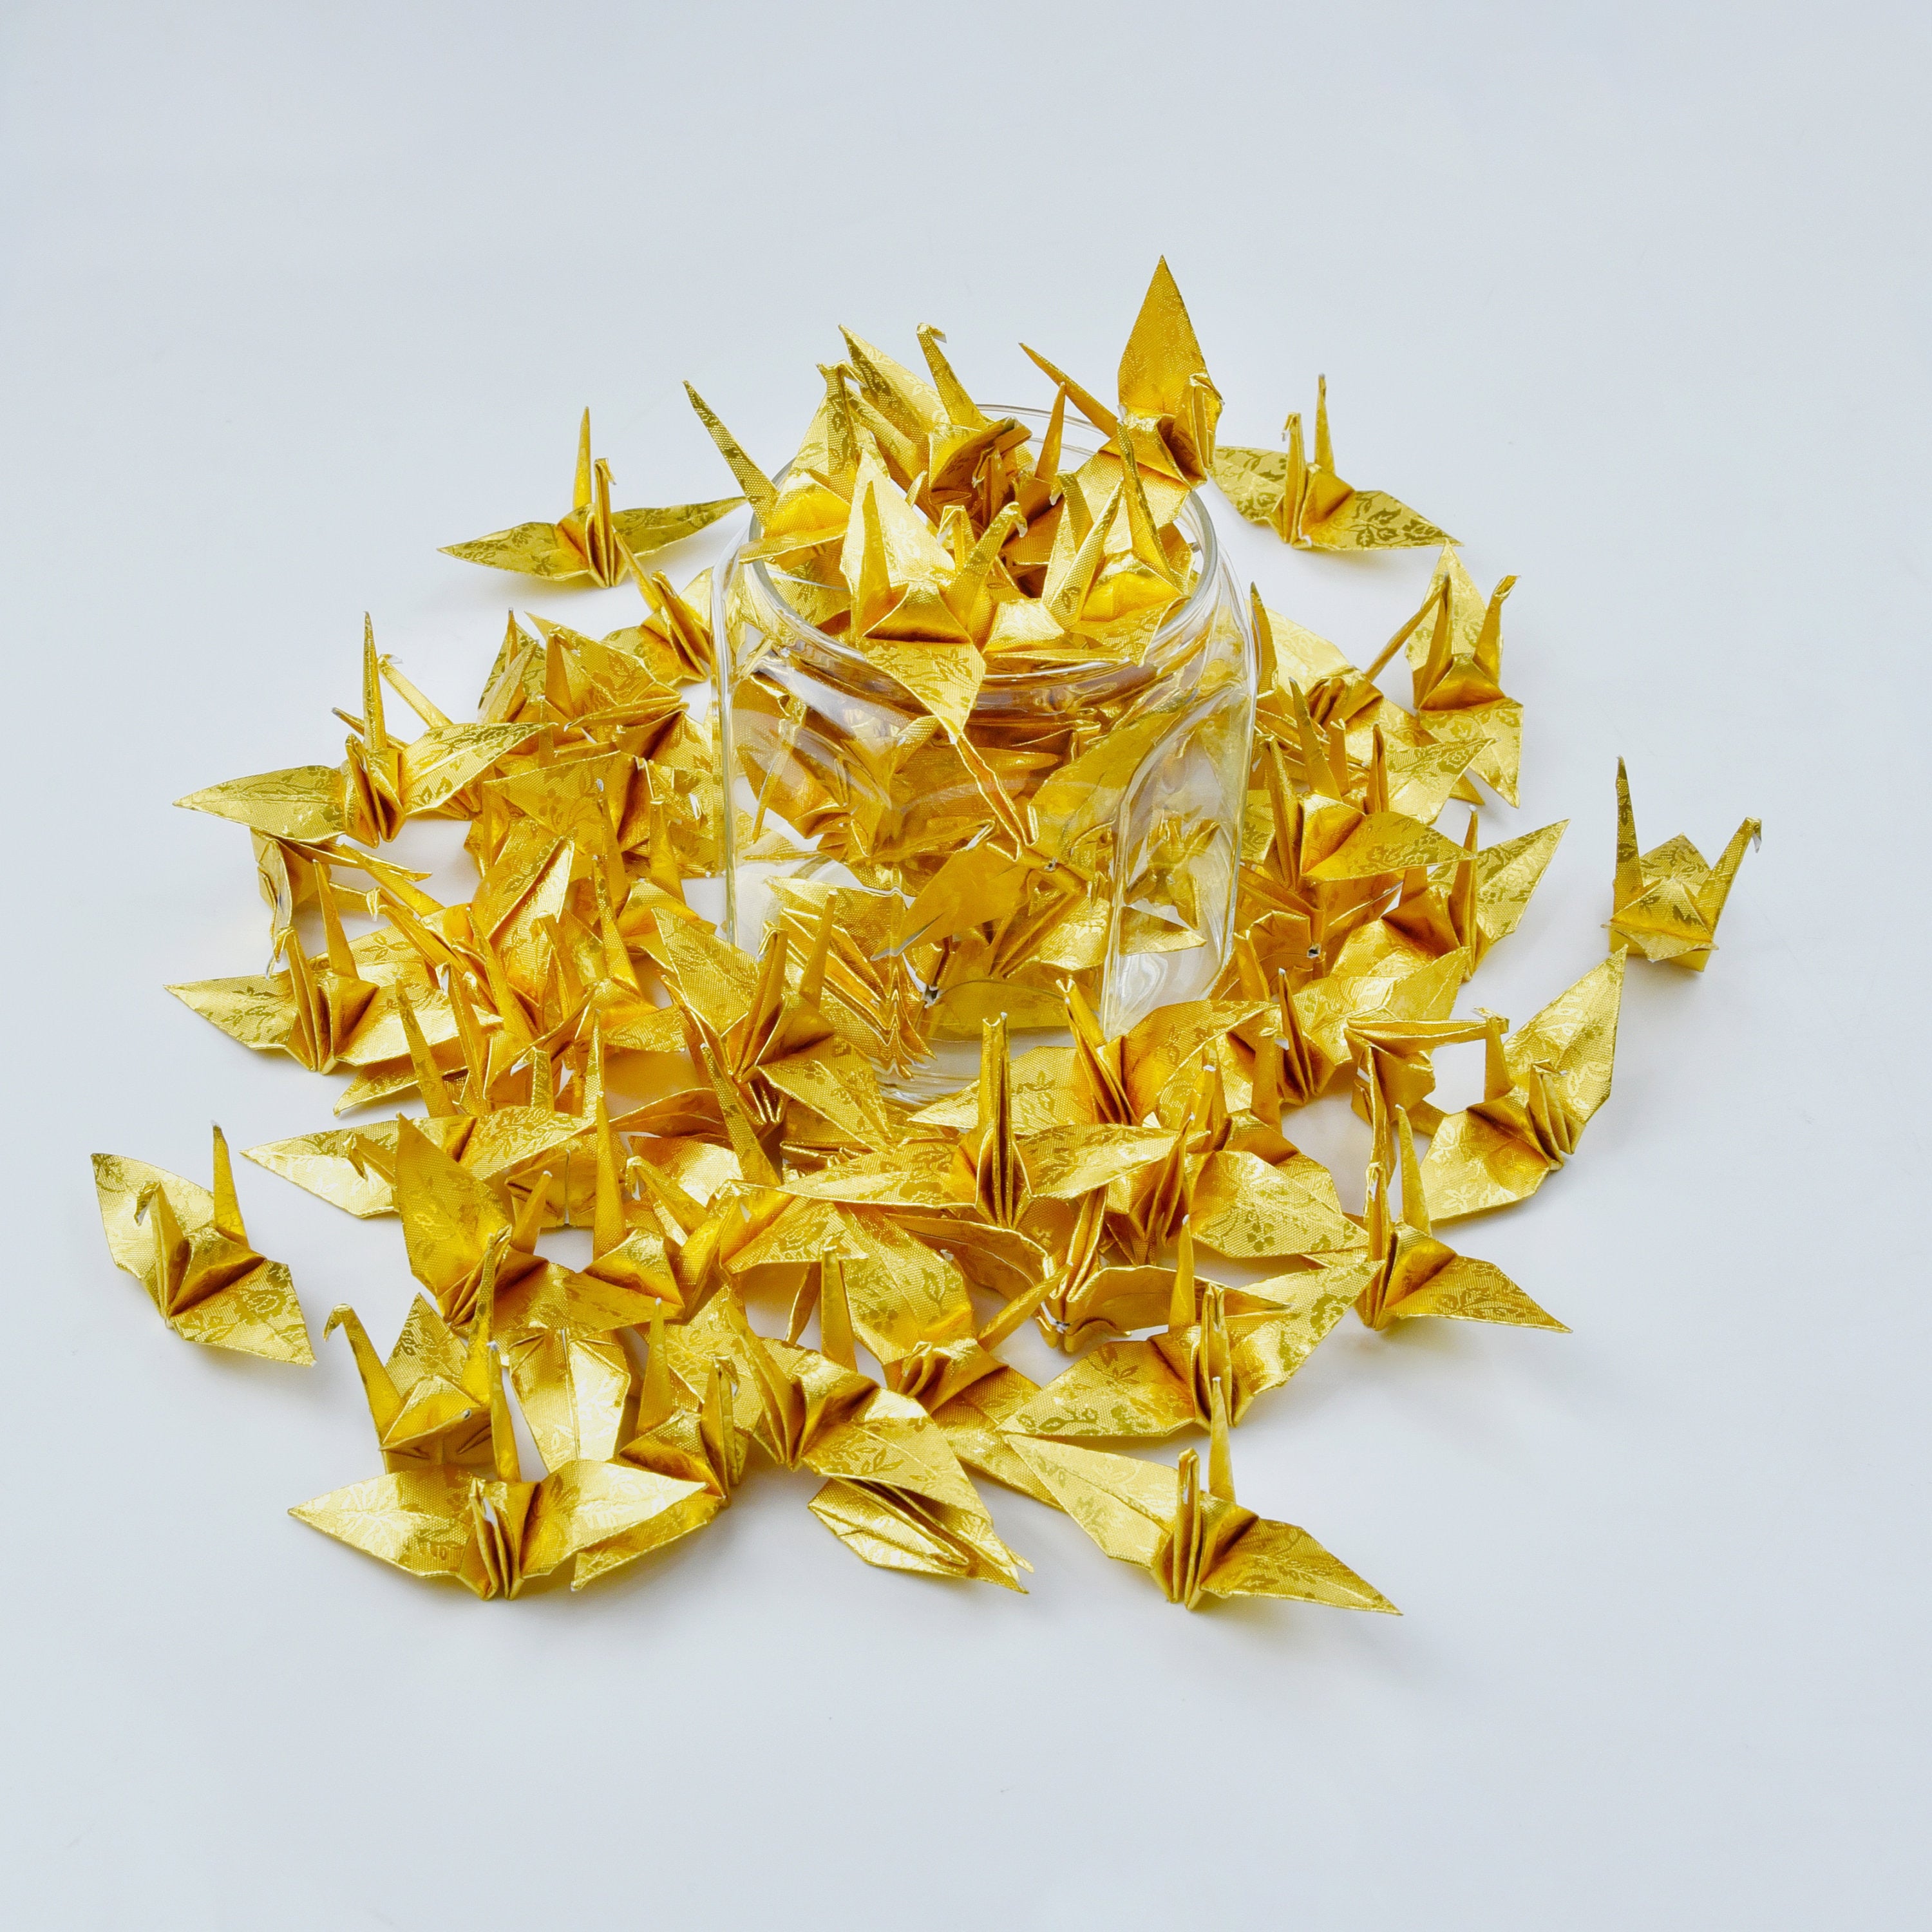 1000 Origami Crane Gold with Rose Pattern Made of 7.5 cm (3x3 inch) for Ornament, Decoration, Wedding